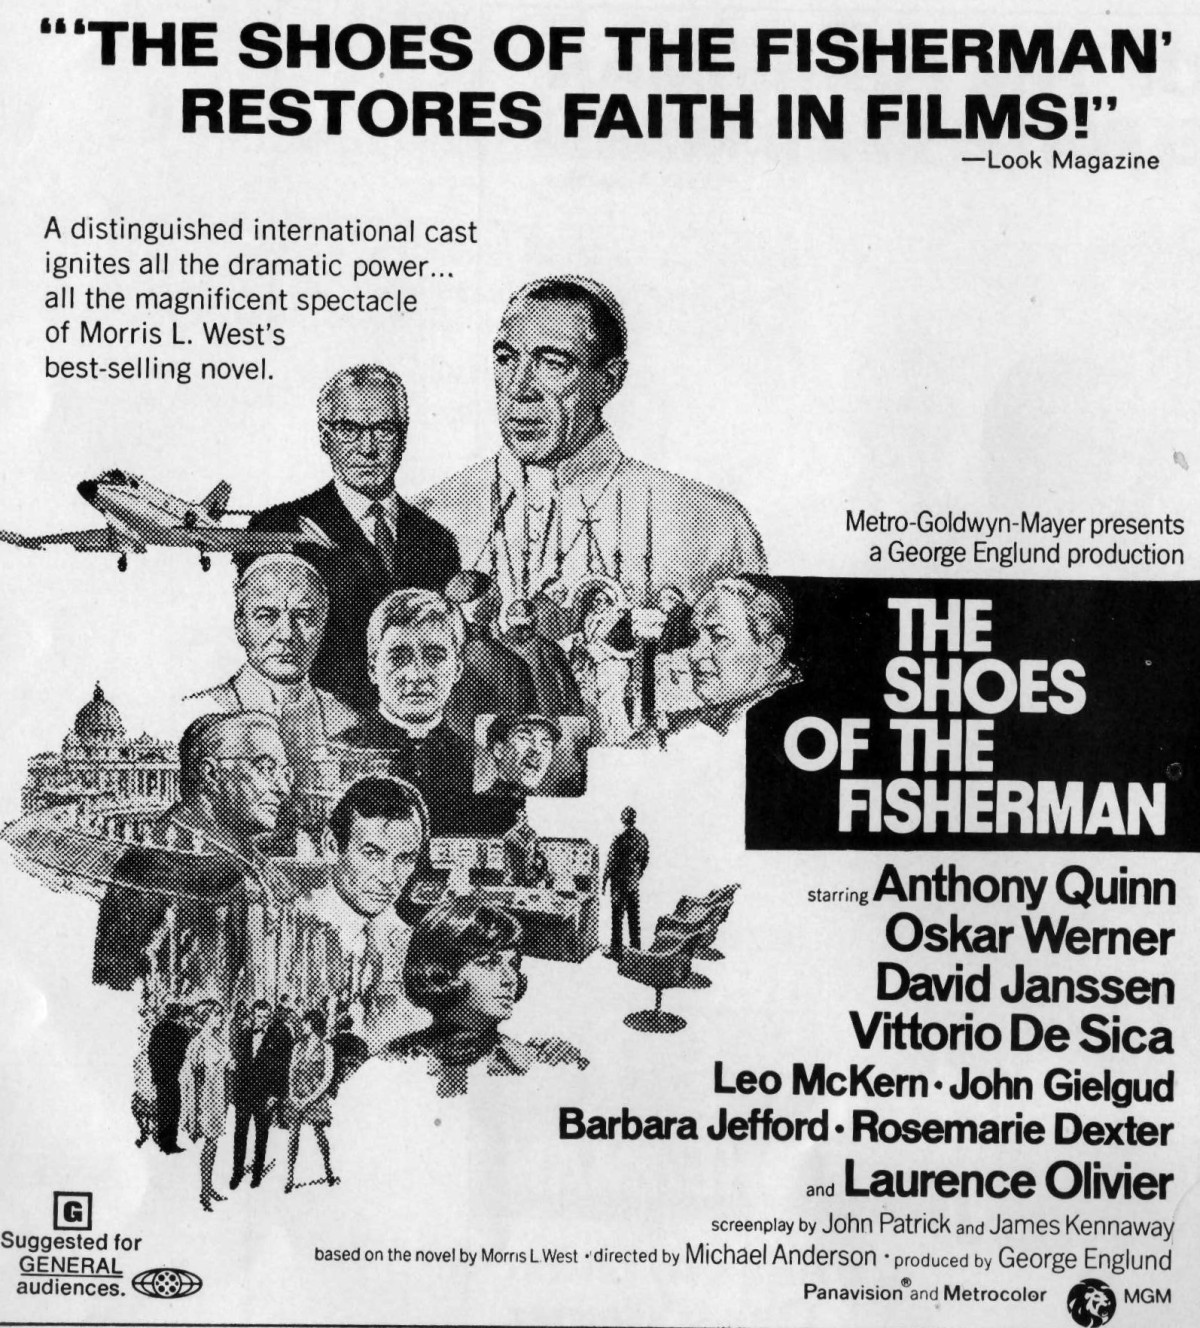 Selling Religion – “The Shoes of the Fisherman” (1968)